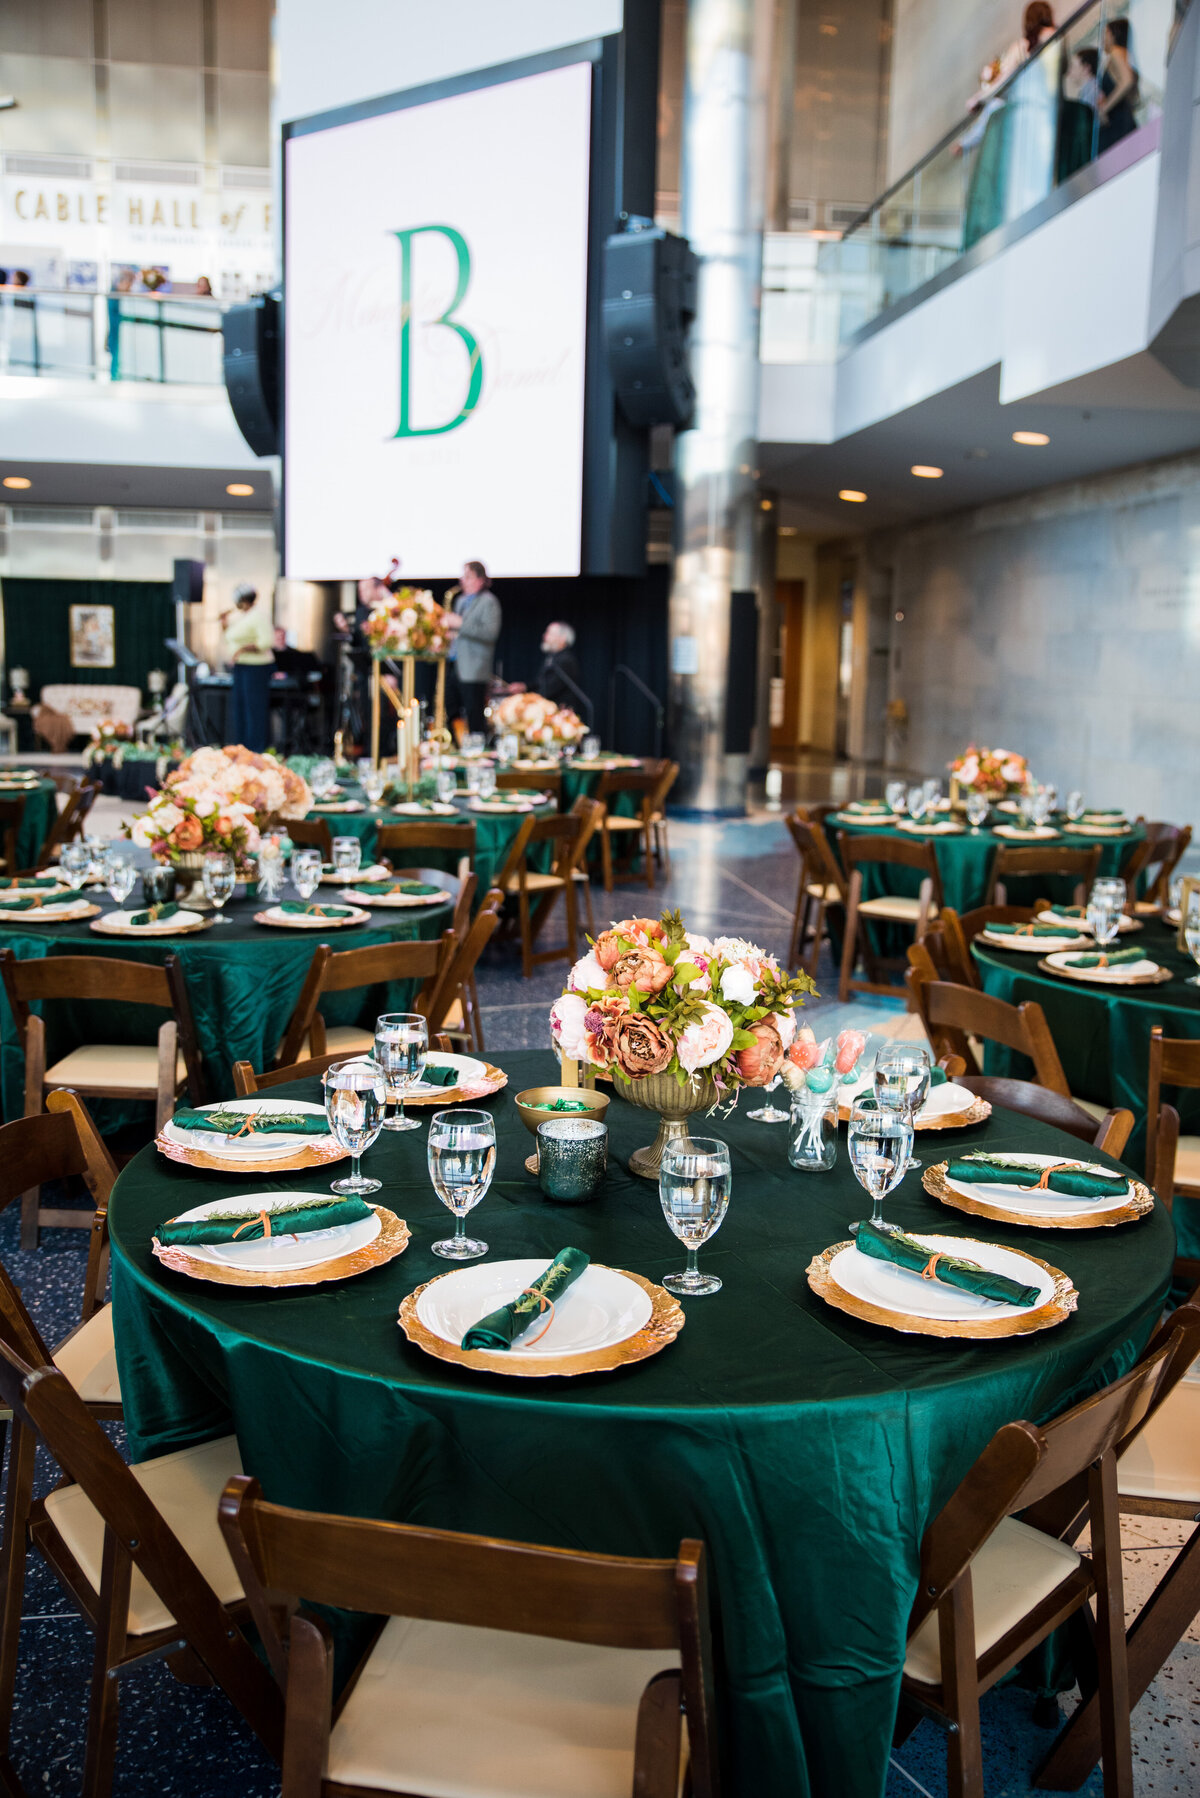 A round reception table is adorned with emerald green tablecloth, plates, and napkins. A large screen with the monogram letter "B" is in the background.